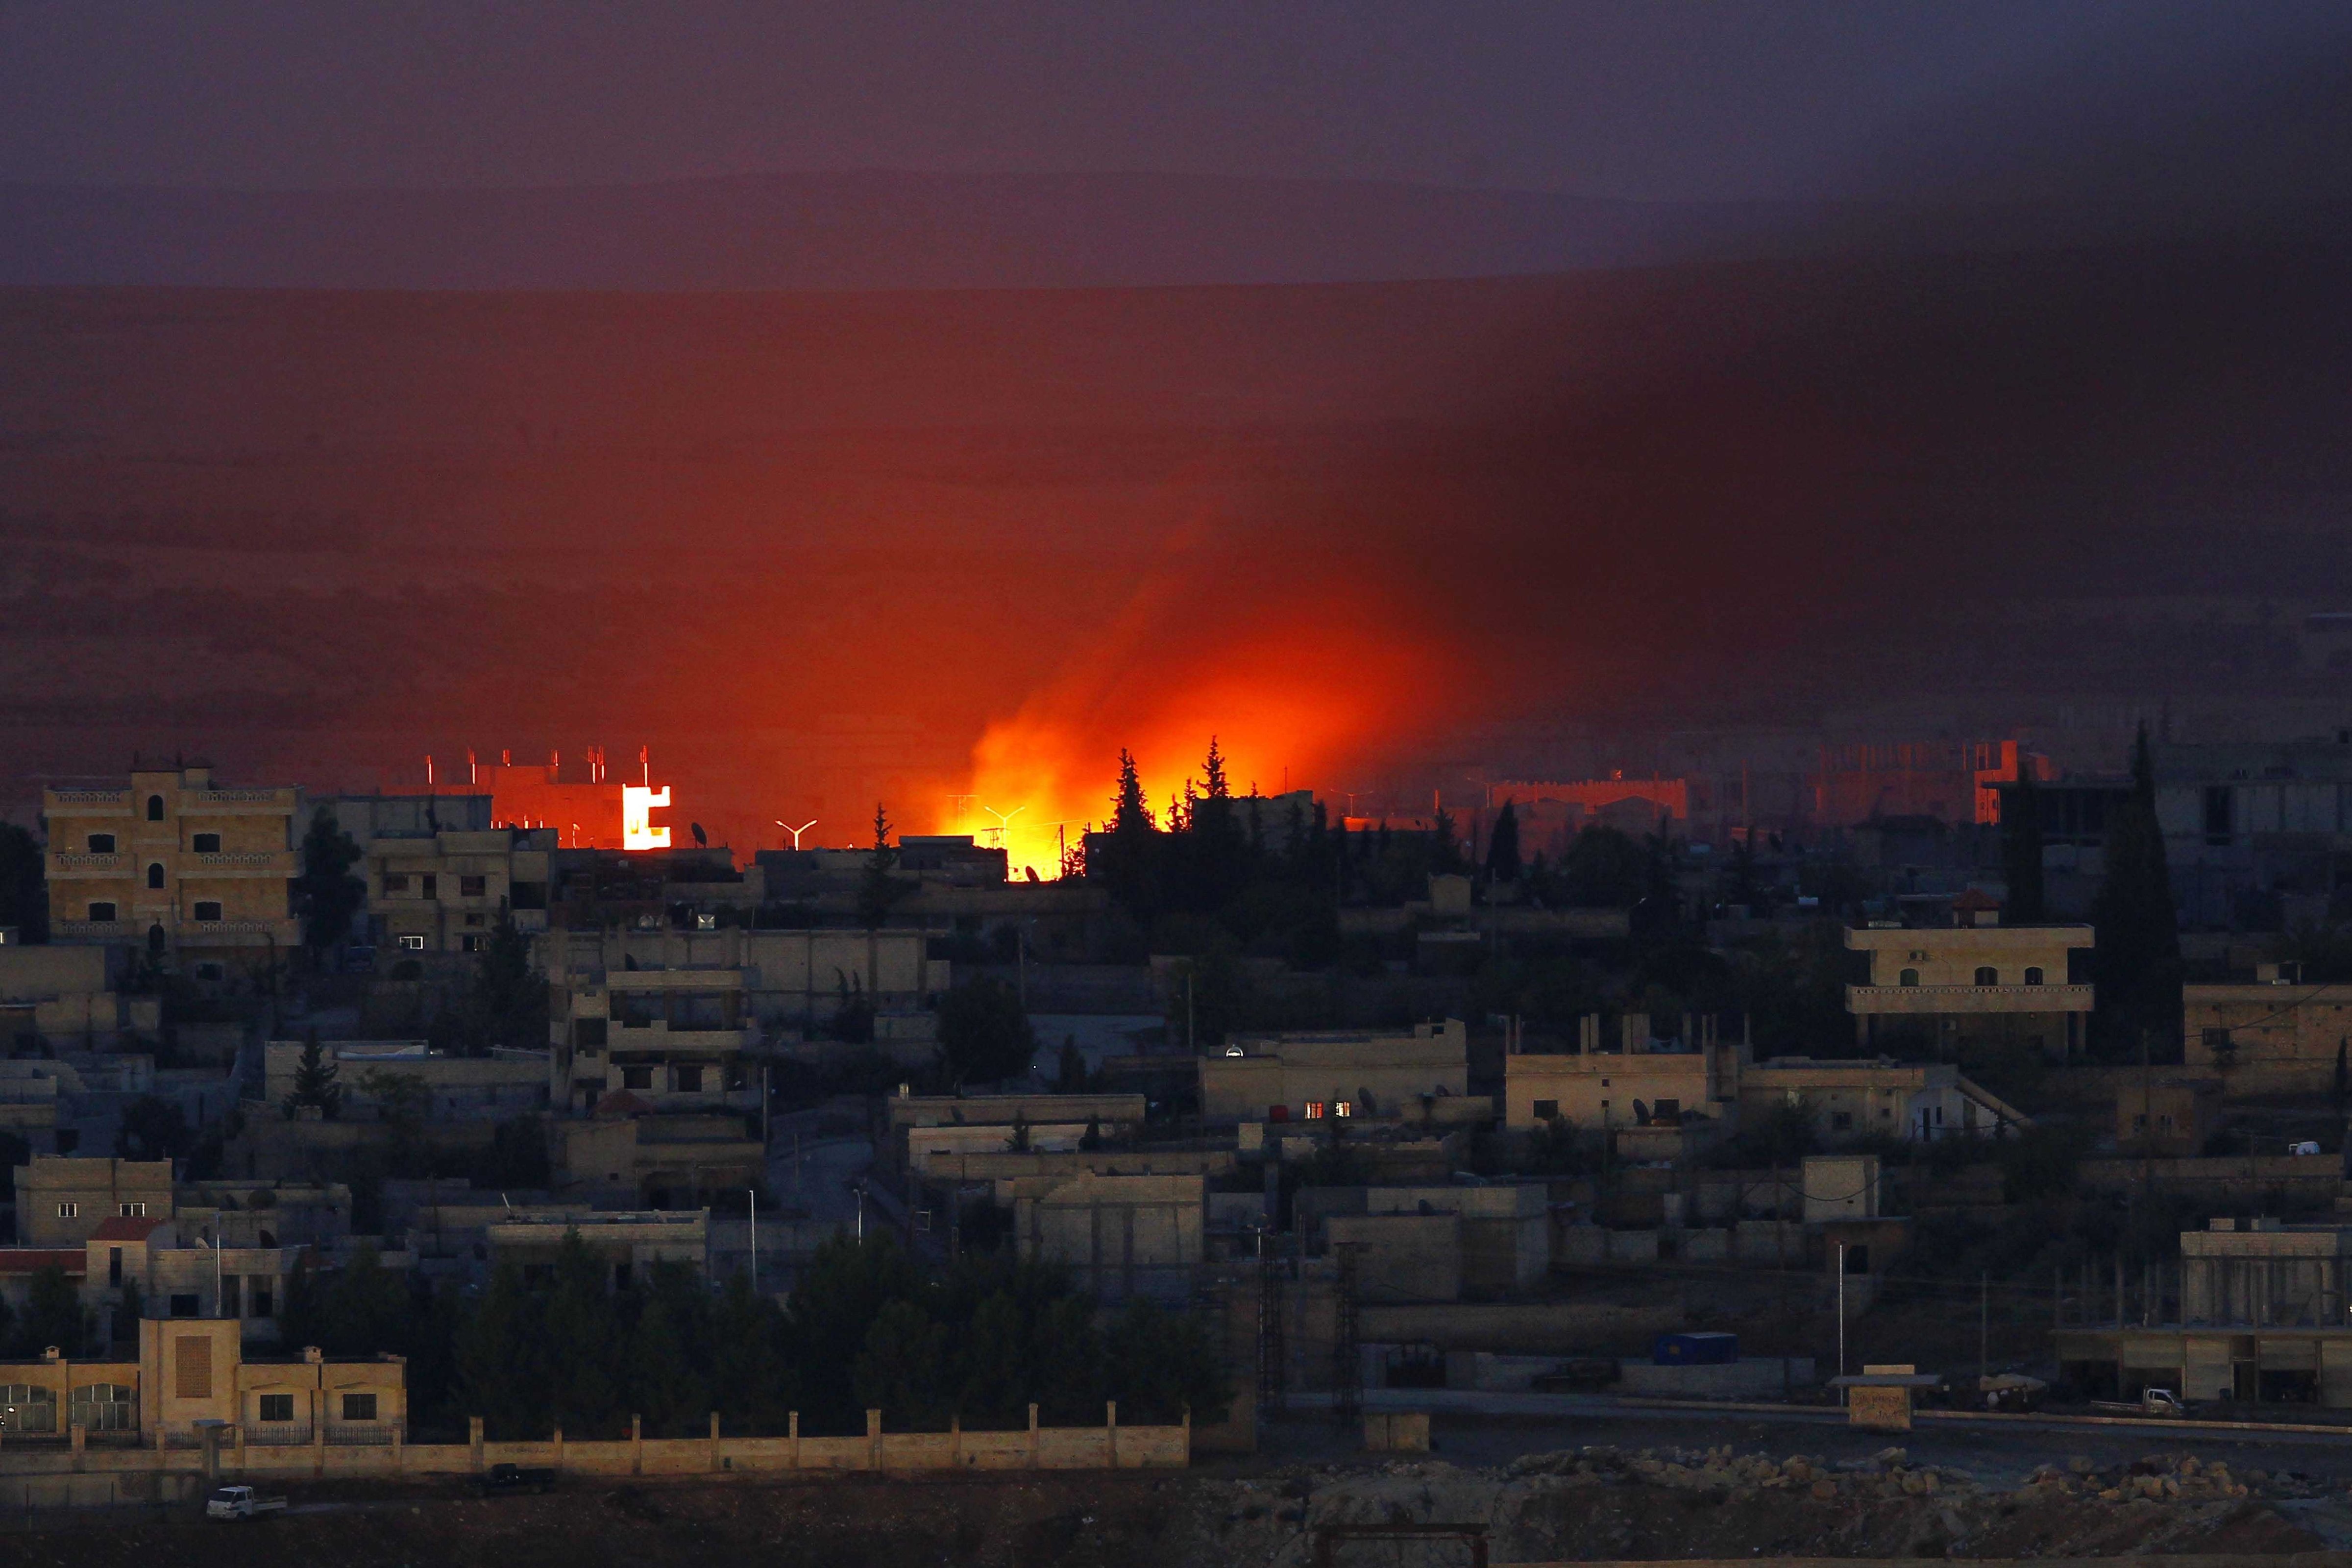 Fire is seen after an US airstrike on ISIS positions in Kobani, Syria, on Oct. 15, 2014. (Ahmet Ozturk—Xinhua/SIPA)